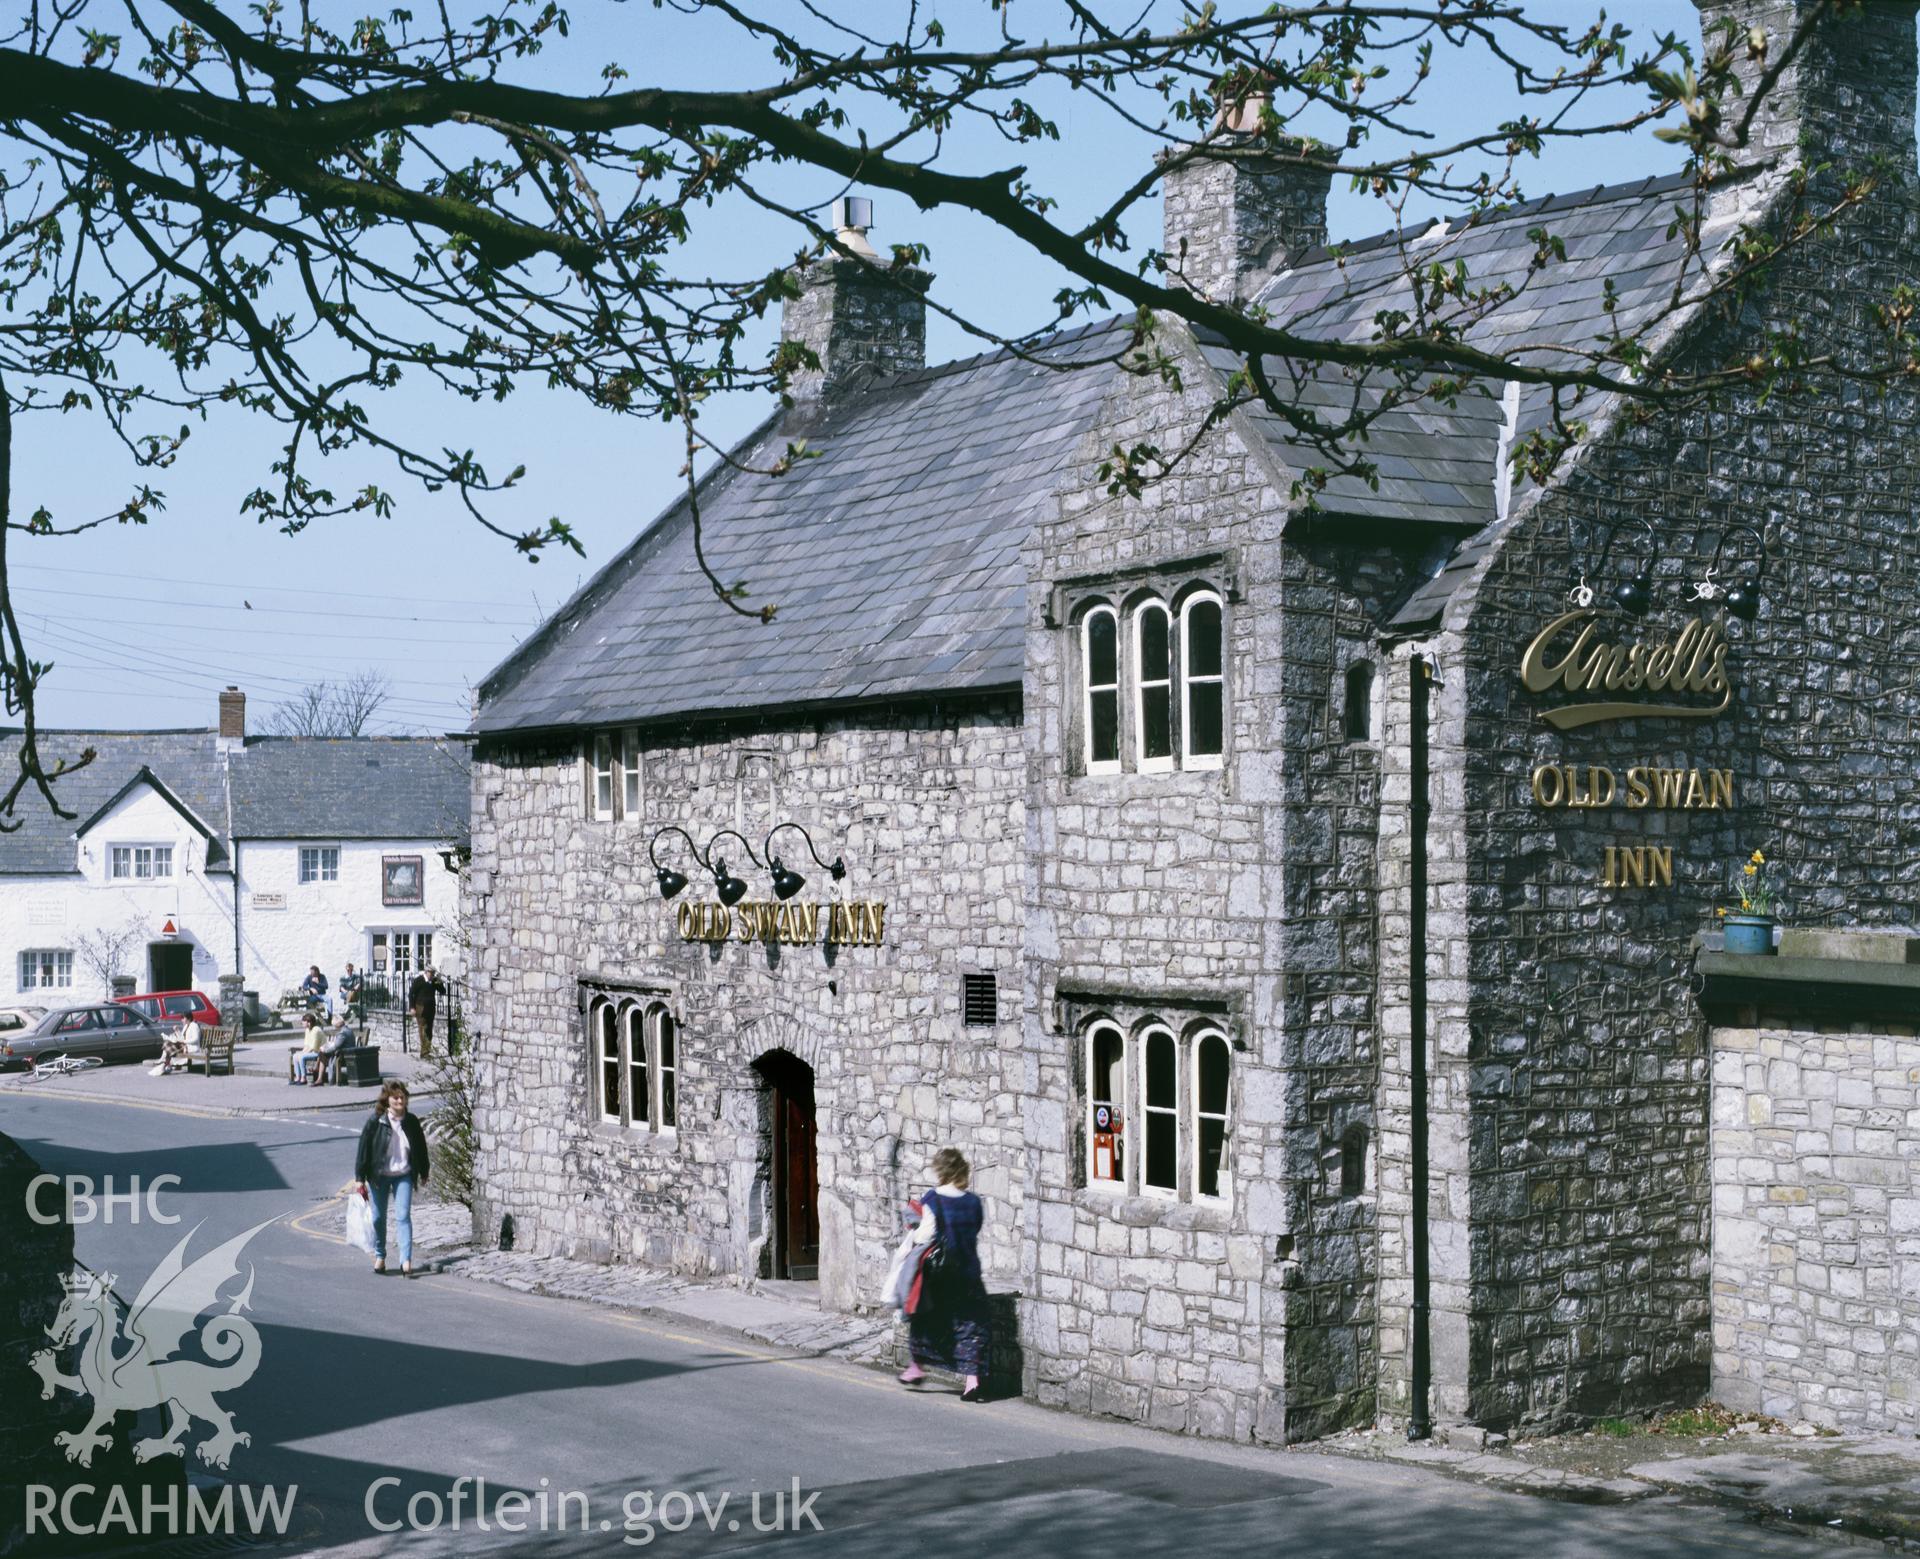 RCAHMW colour transparency of an exterior view of Old Swan Inn, Llantwit Major.